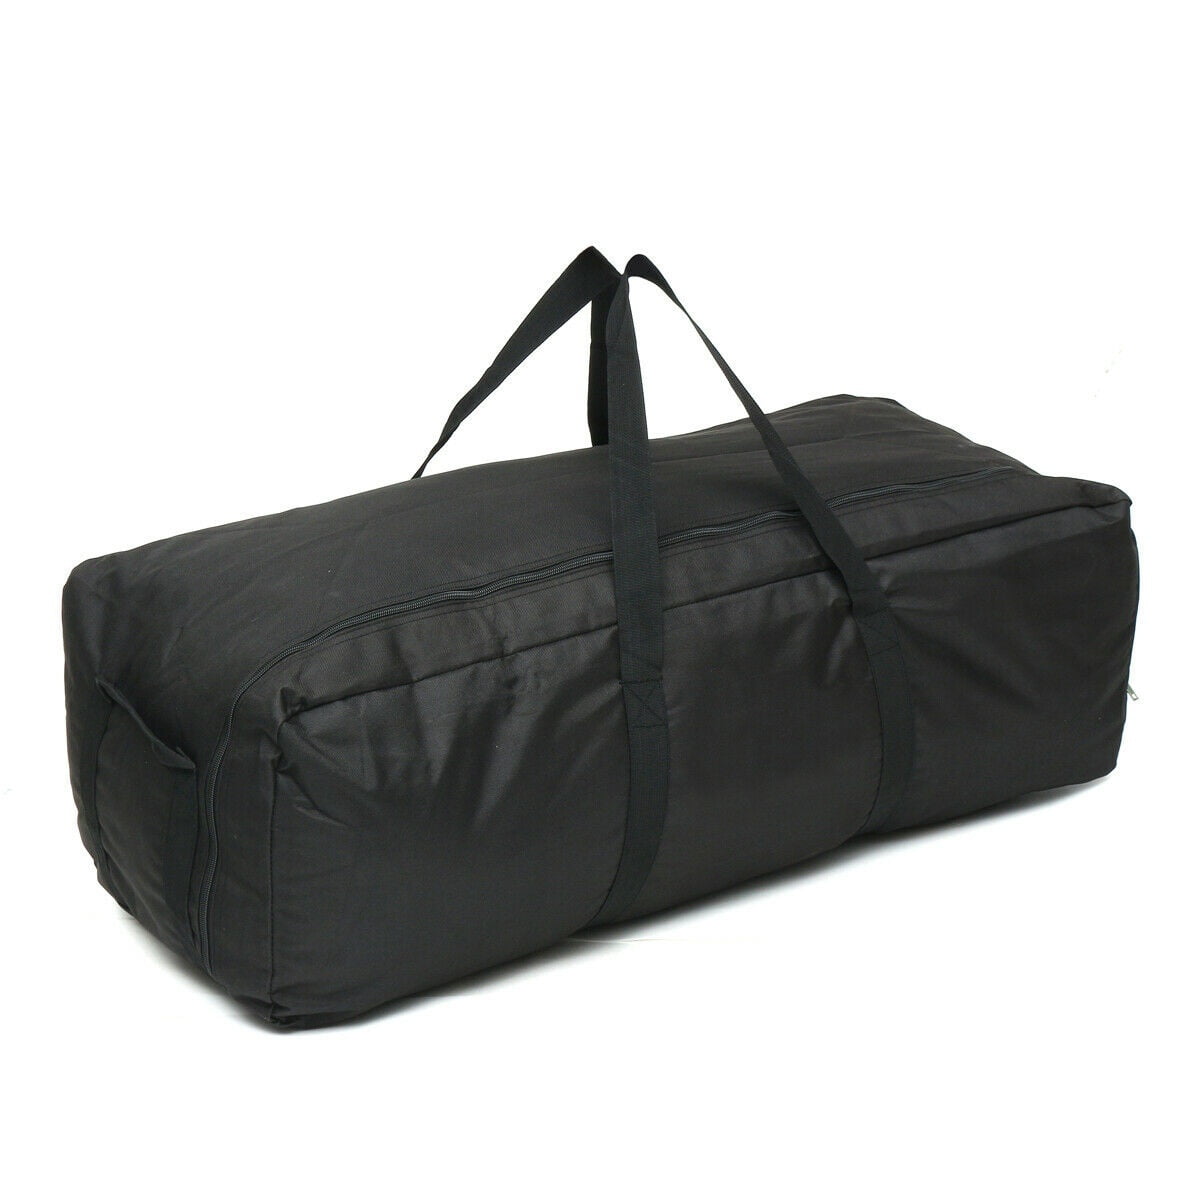 Extra Large Packable Duffle Bag Travel Gym Sport Duffle Bag Canvas Collapsible 